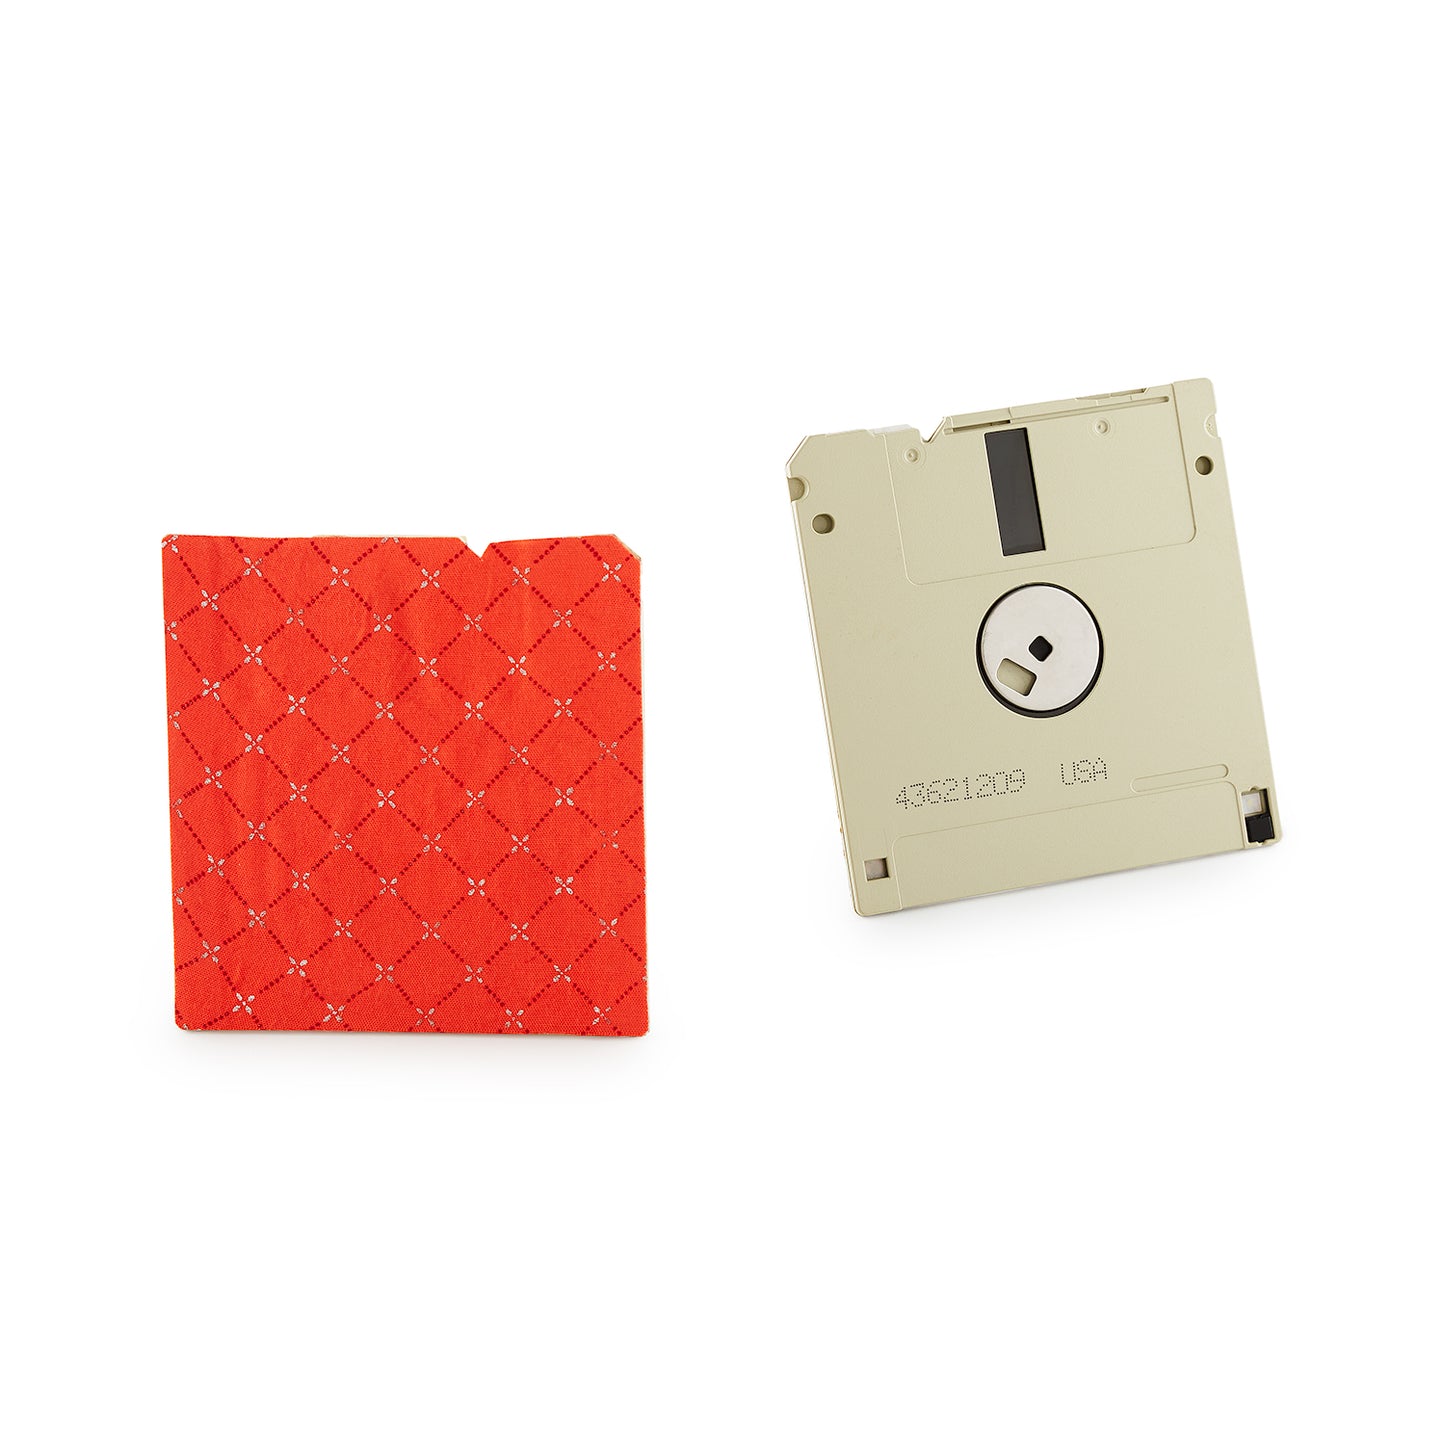 Candy Red - Floppy Disk Coaster Set of 2